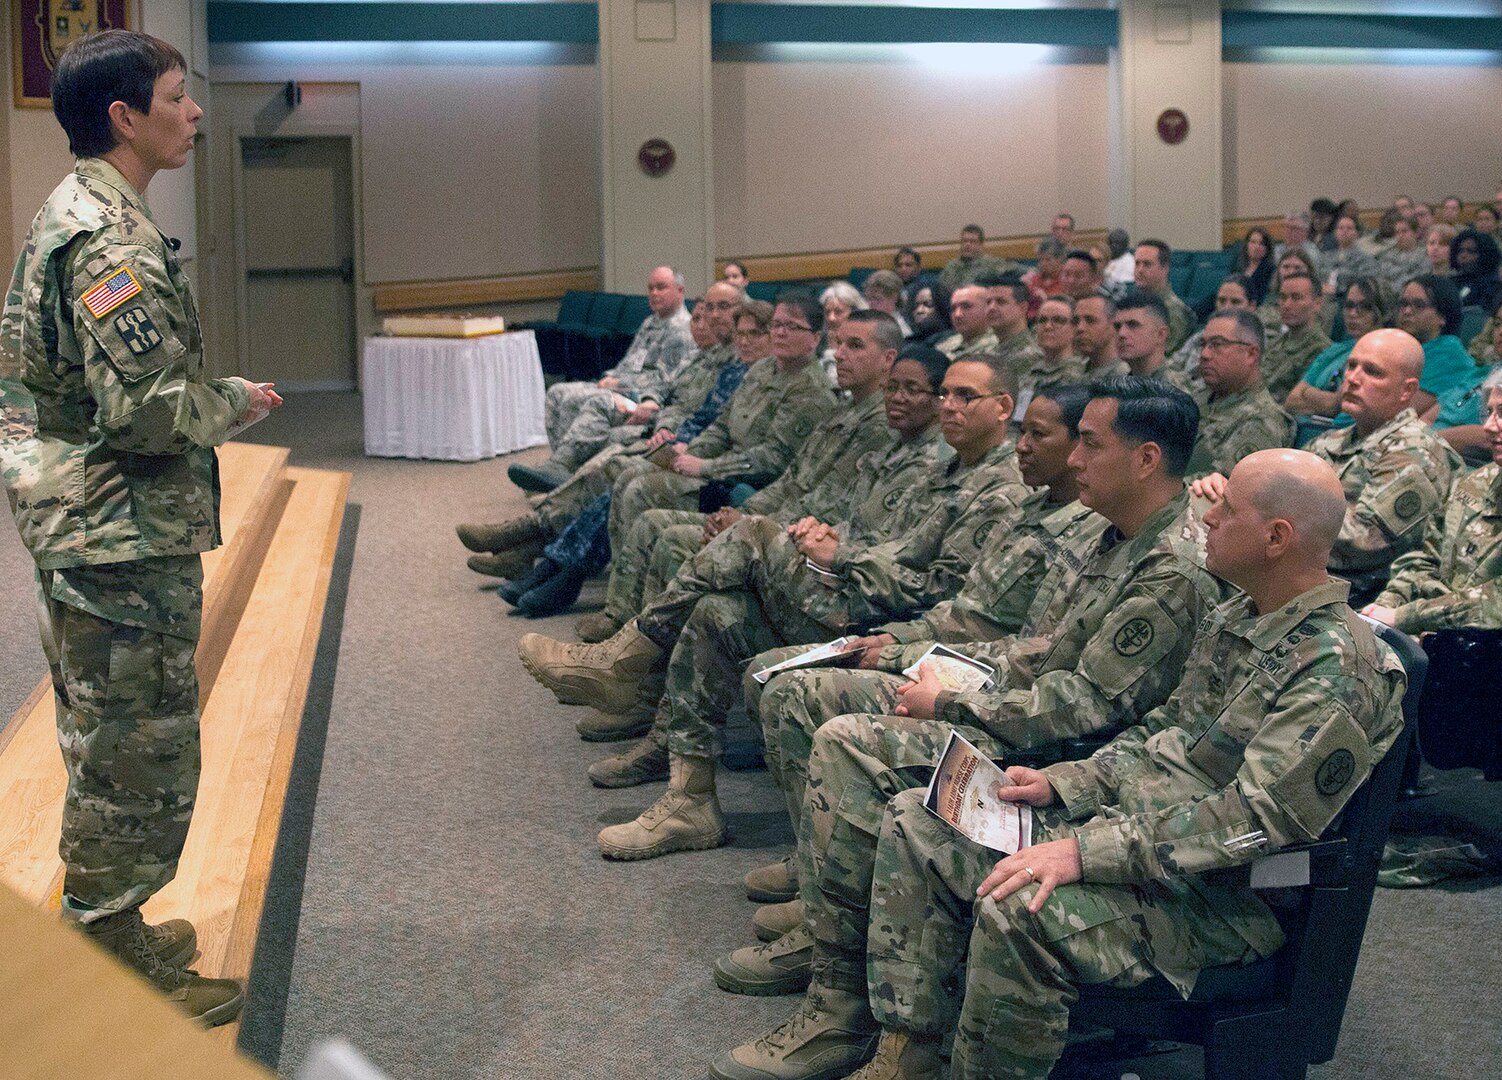 Maj. Gen. Barbara Holcomb, chief of the U.S. Army Nurse Corps speaks to medical personnel during a celebration of   the 116th birthday of the Army Nurse Corps in the Brooke Army Medical Center auditorium at Joint Base San Antonio-Fort Sam Houston Feb. 2. 

